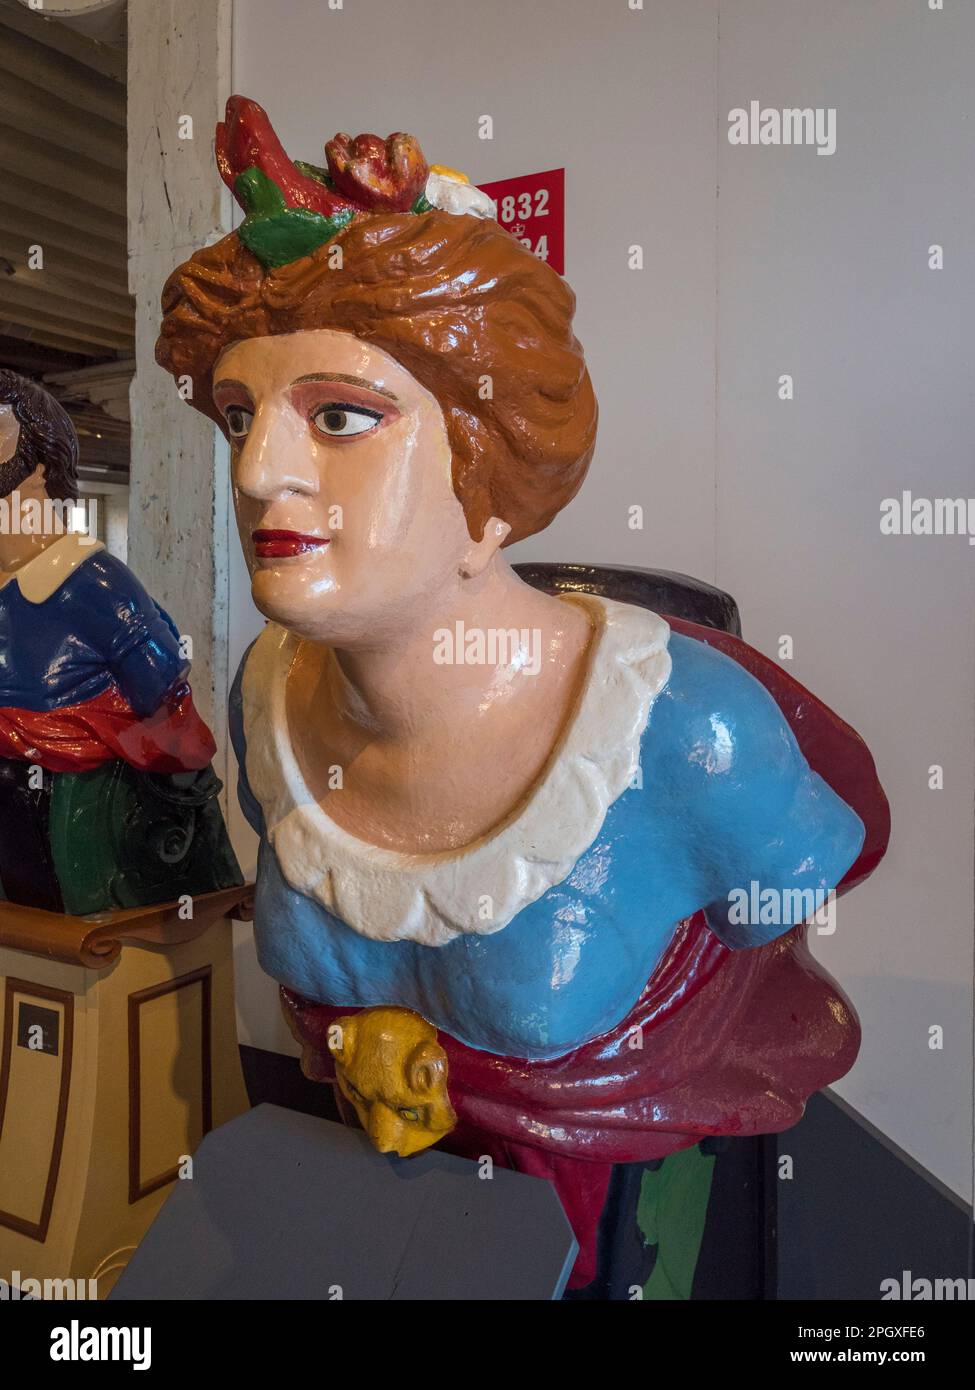 The figurehead of HMS Diana, a 5th rate 46-gun sail ship launched in 1822. Steam, Steel & Submarines exhibit, Historic Dockyard Chatham, Kent, UK. Stock Photo